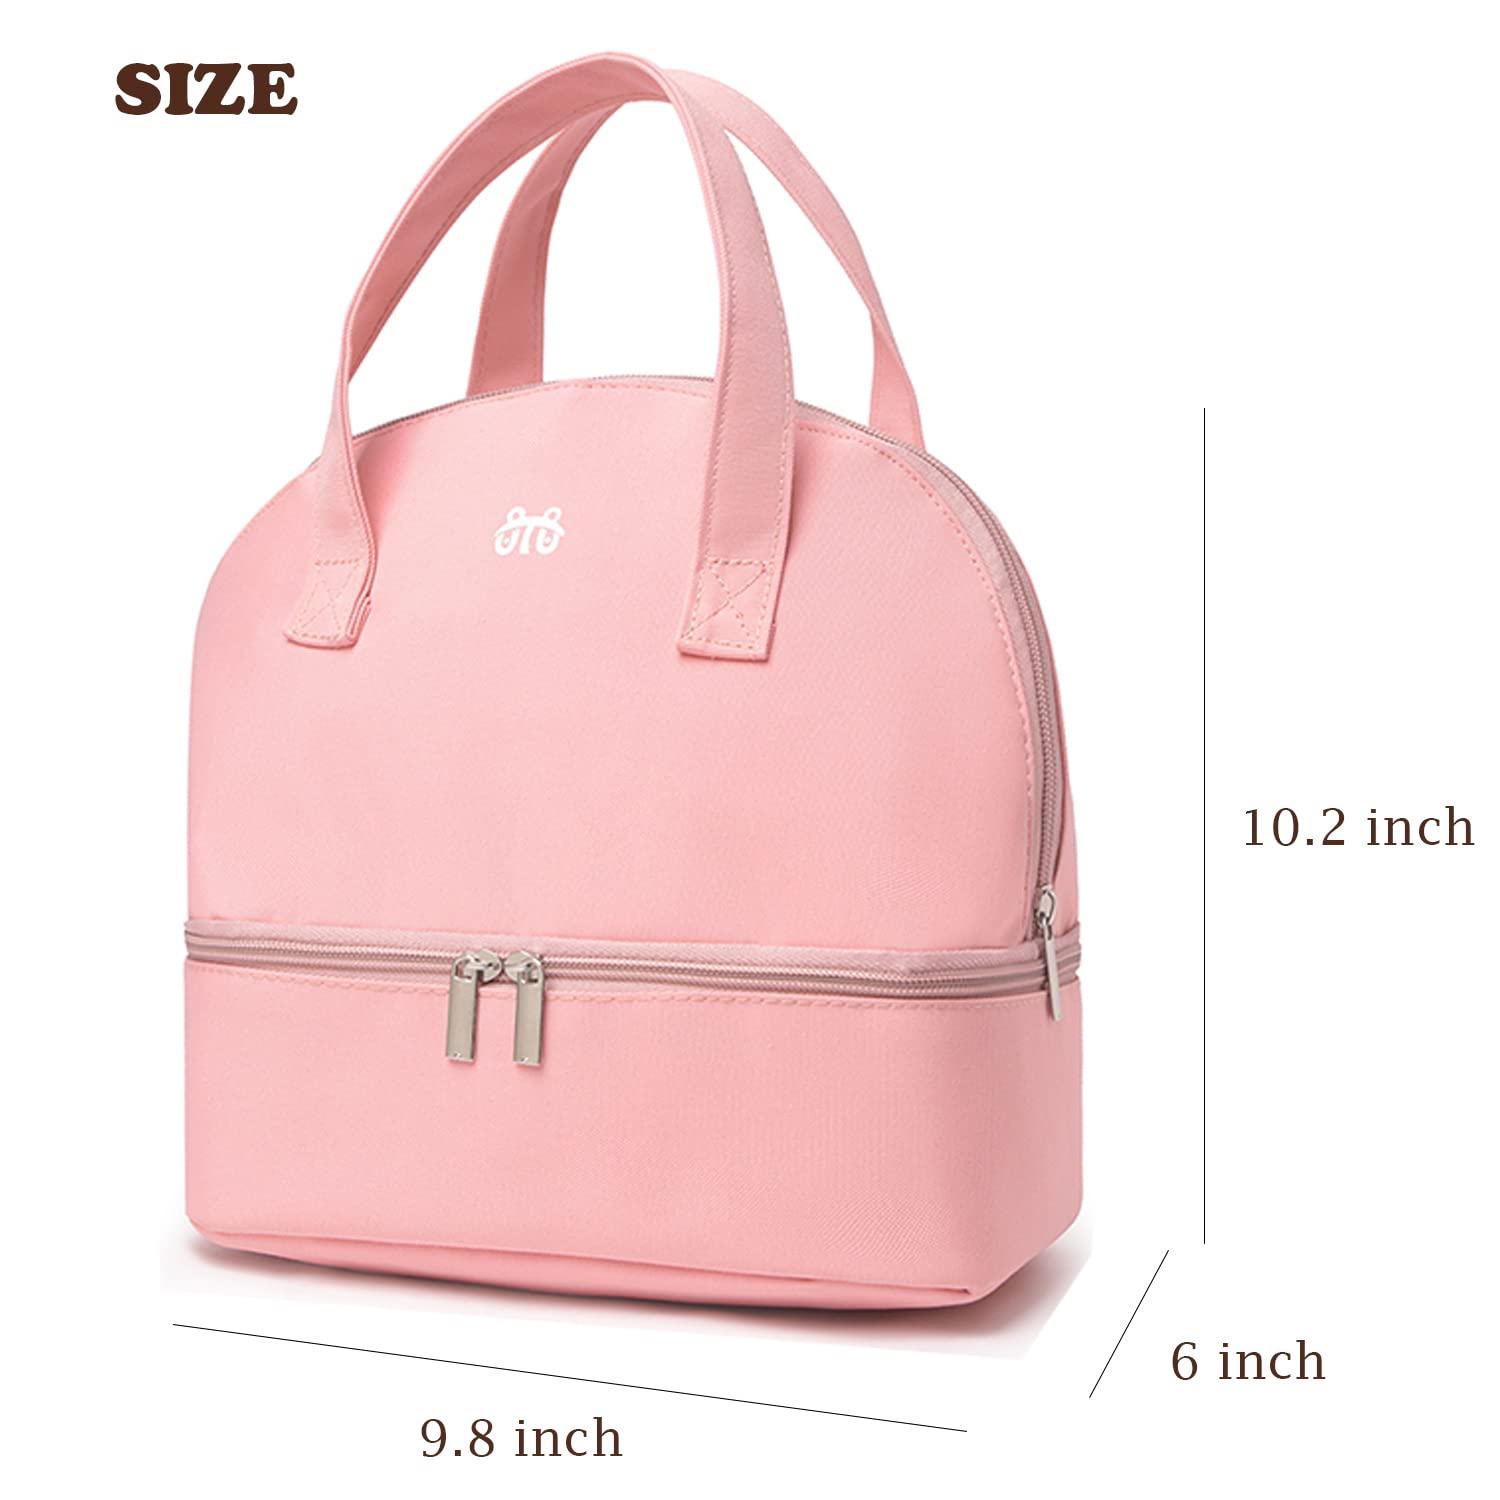 Lovyan Insulated Lunch Bag Double Deck Simple Bento Cooler Bag Water-resistant Lunch Tote Bag for Lunch Box for Women Men Adult Picnic Working Hiking Beach (Pink)